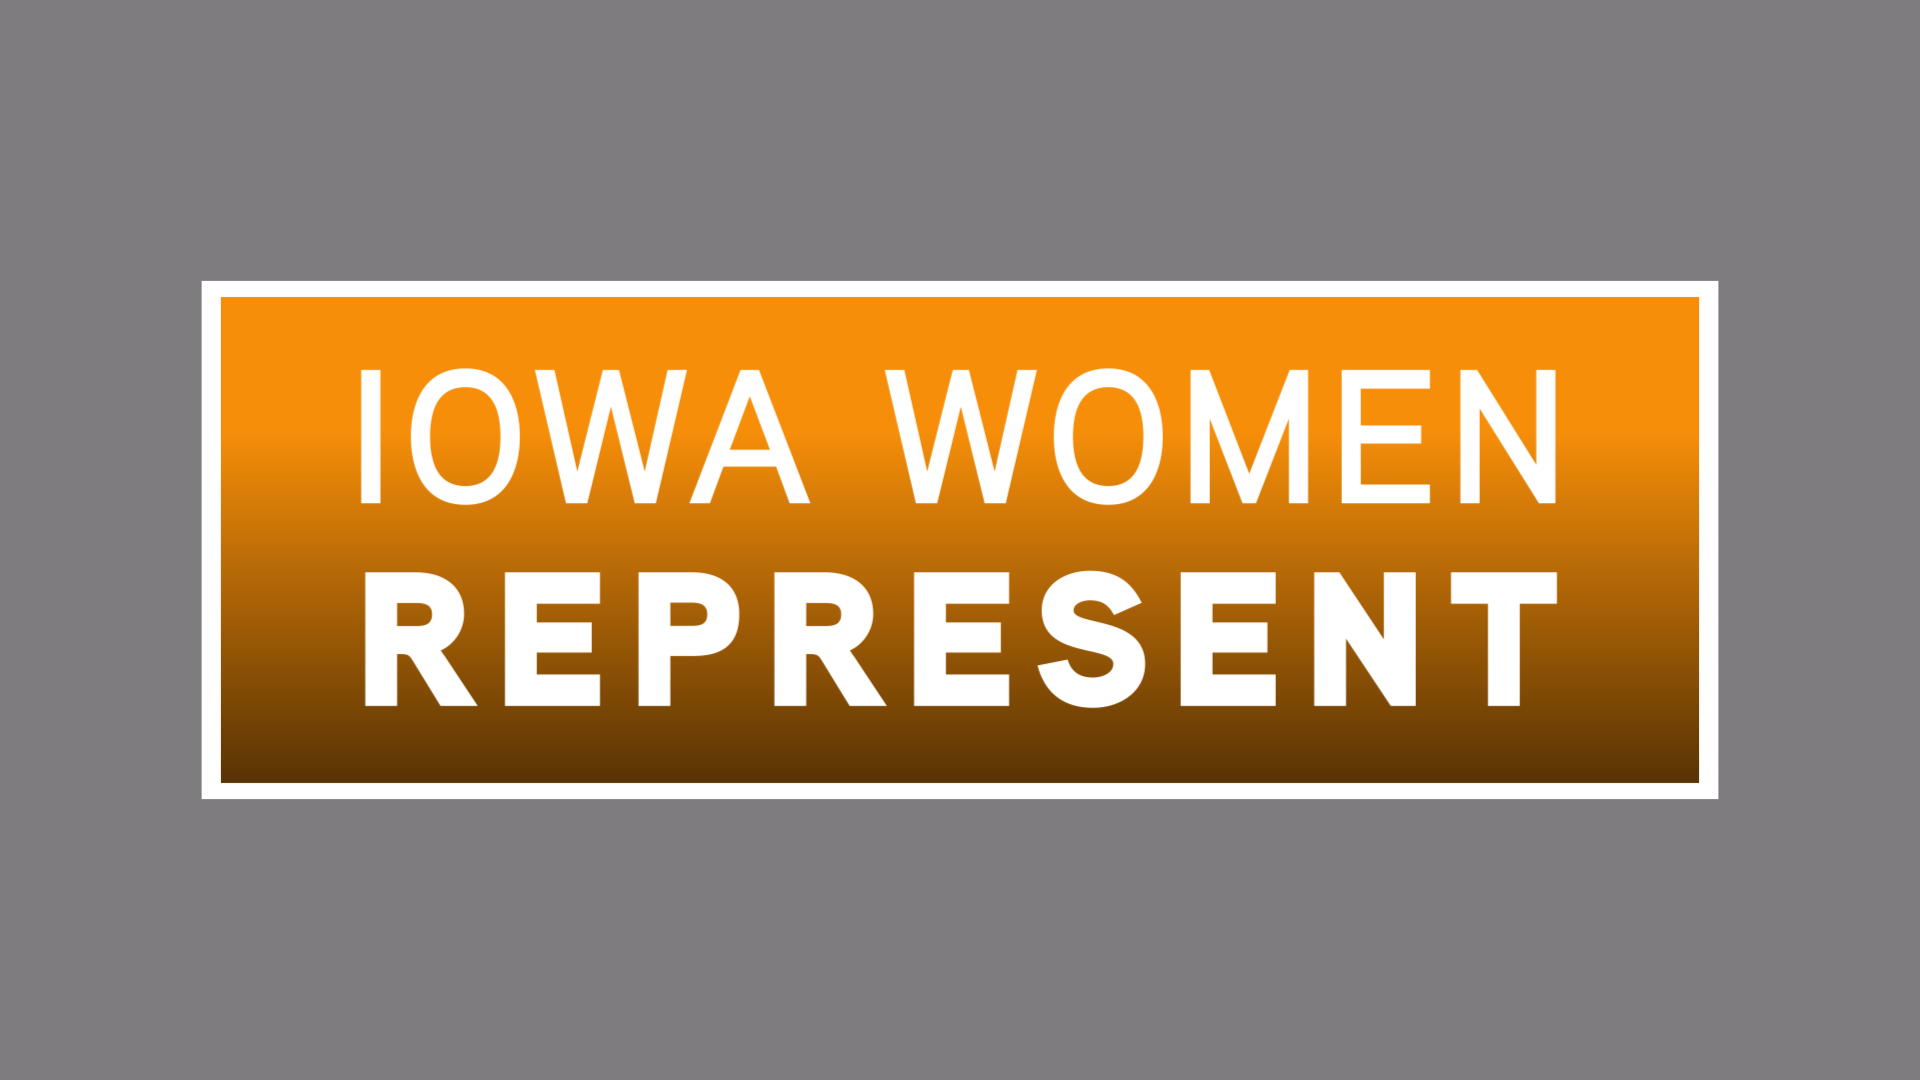 Whether they be a mayor, senator or whatever, women are moving Iowa forward. However, systemic inequities still remain before we shatter that glass ceiling.